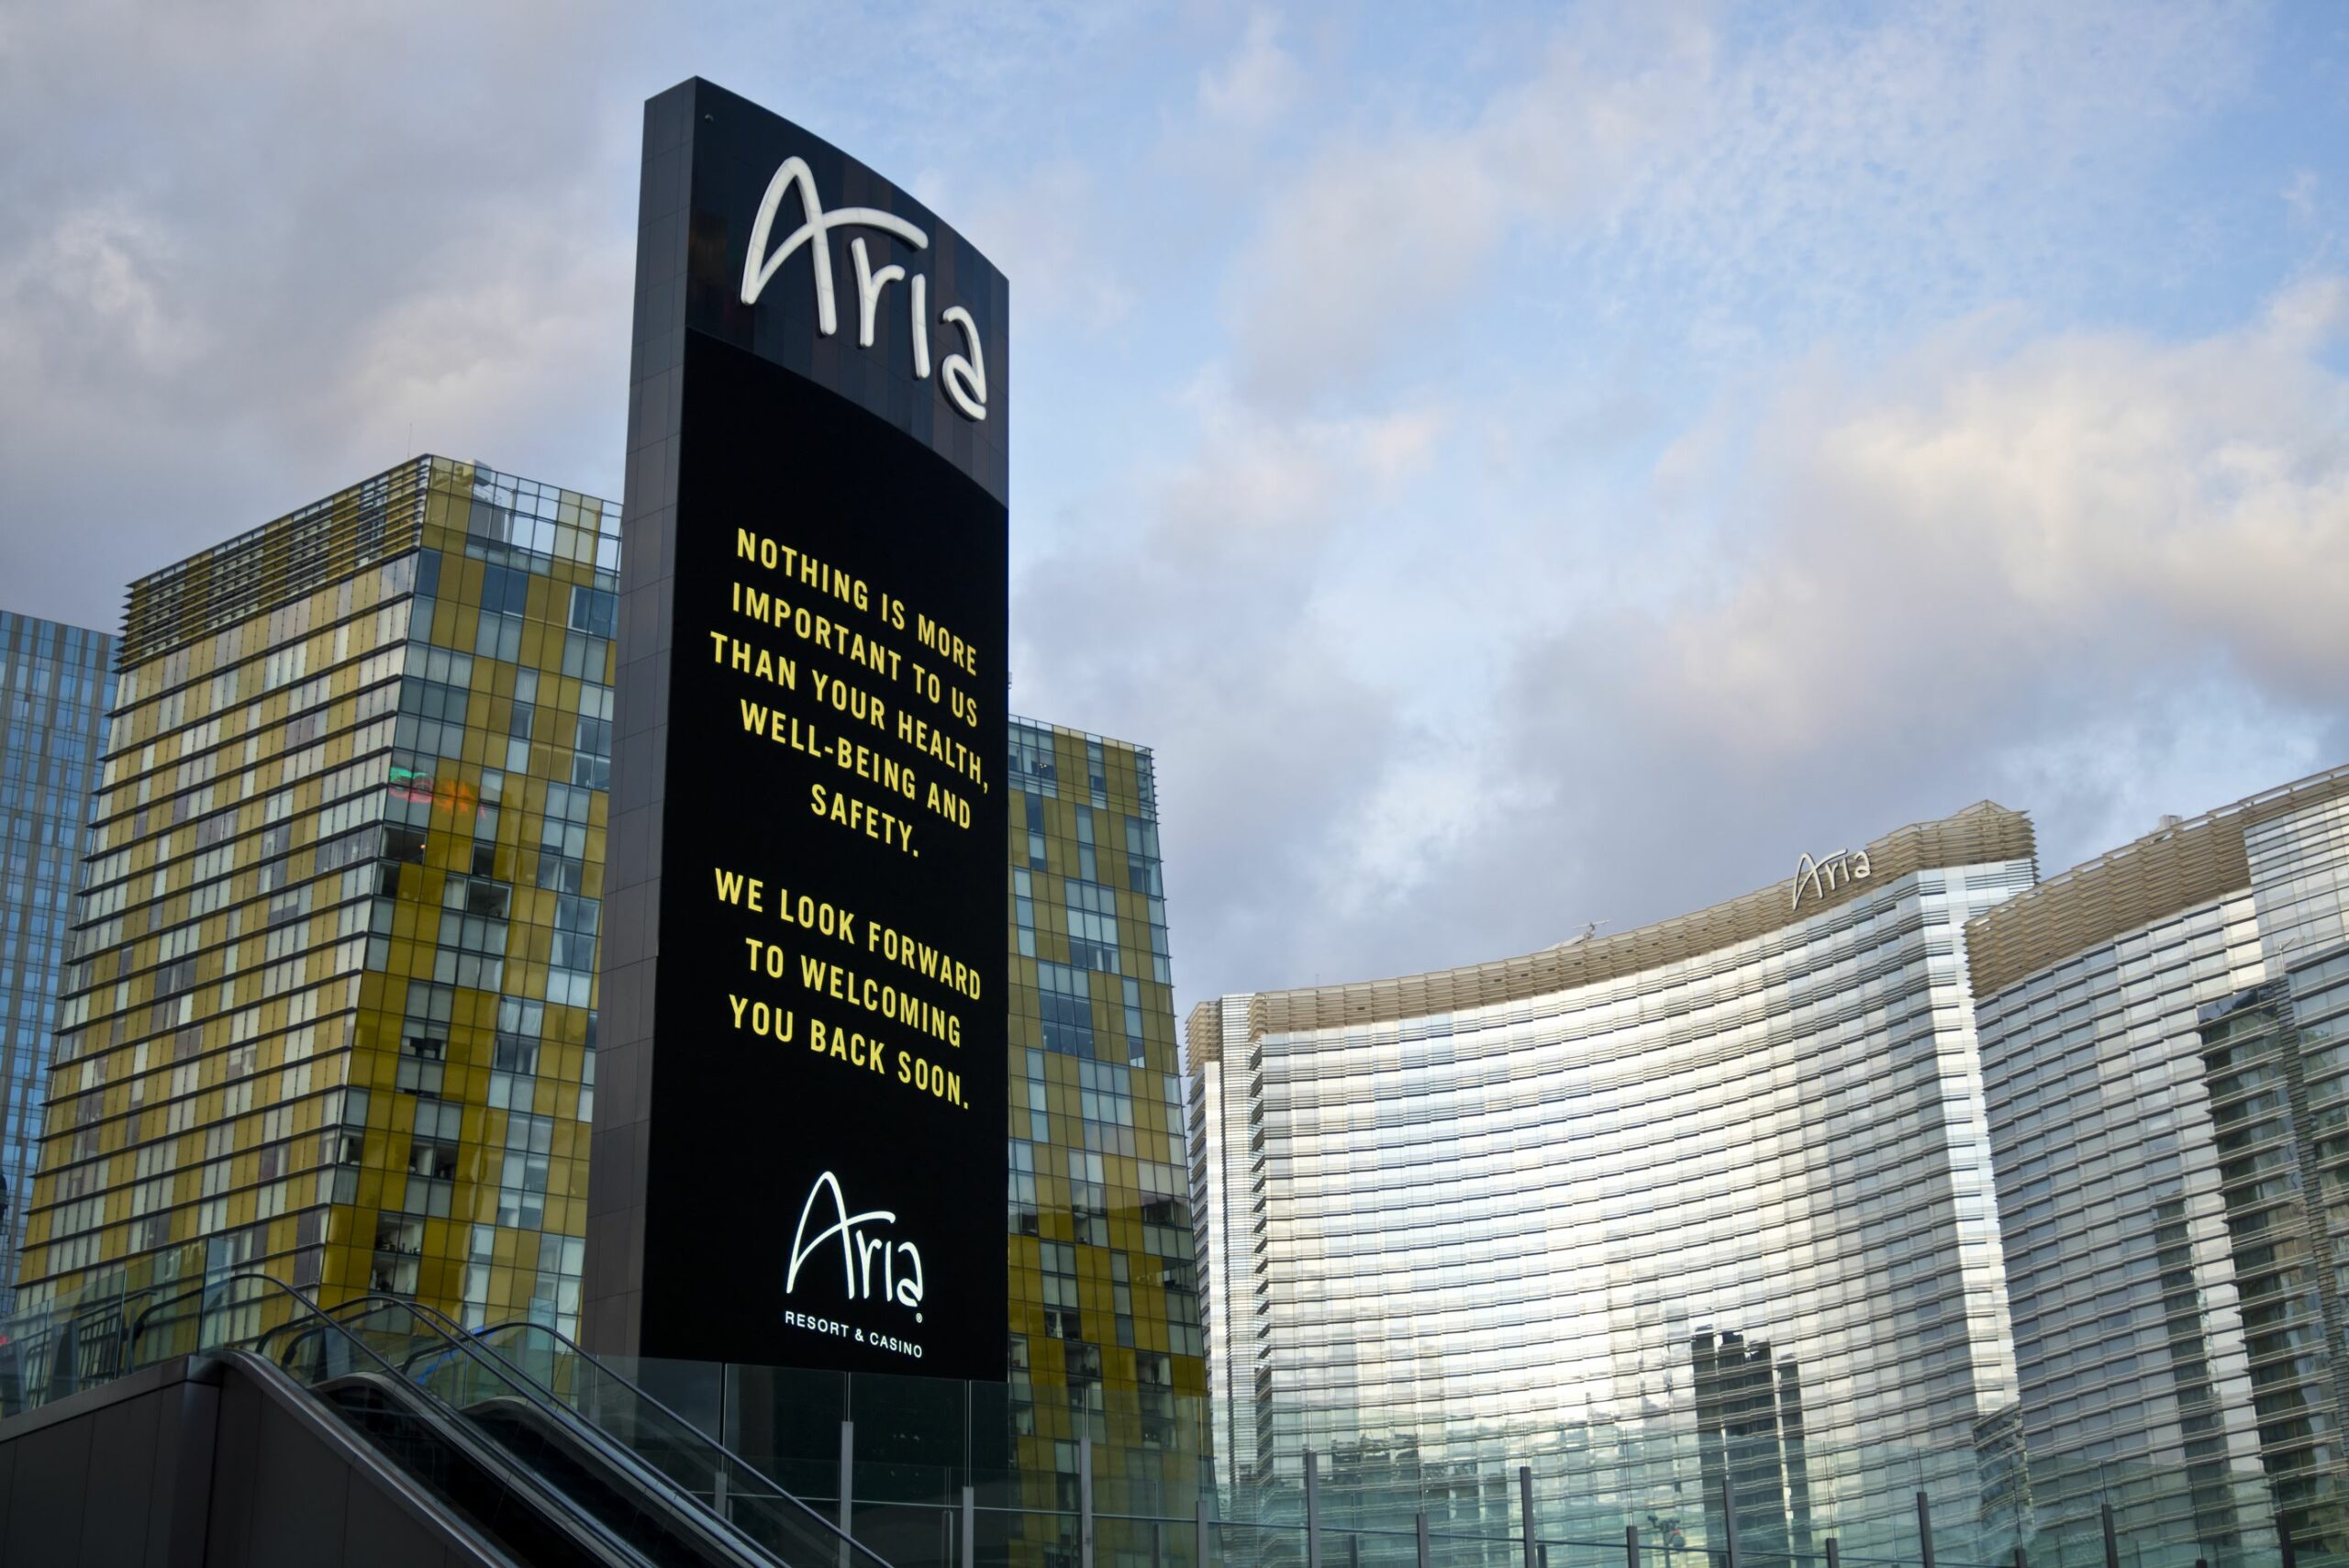 Aria sign with message of noting is more important to us than your health, well-being and safety. We look forward to welcoming you back soon.